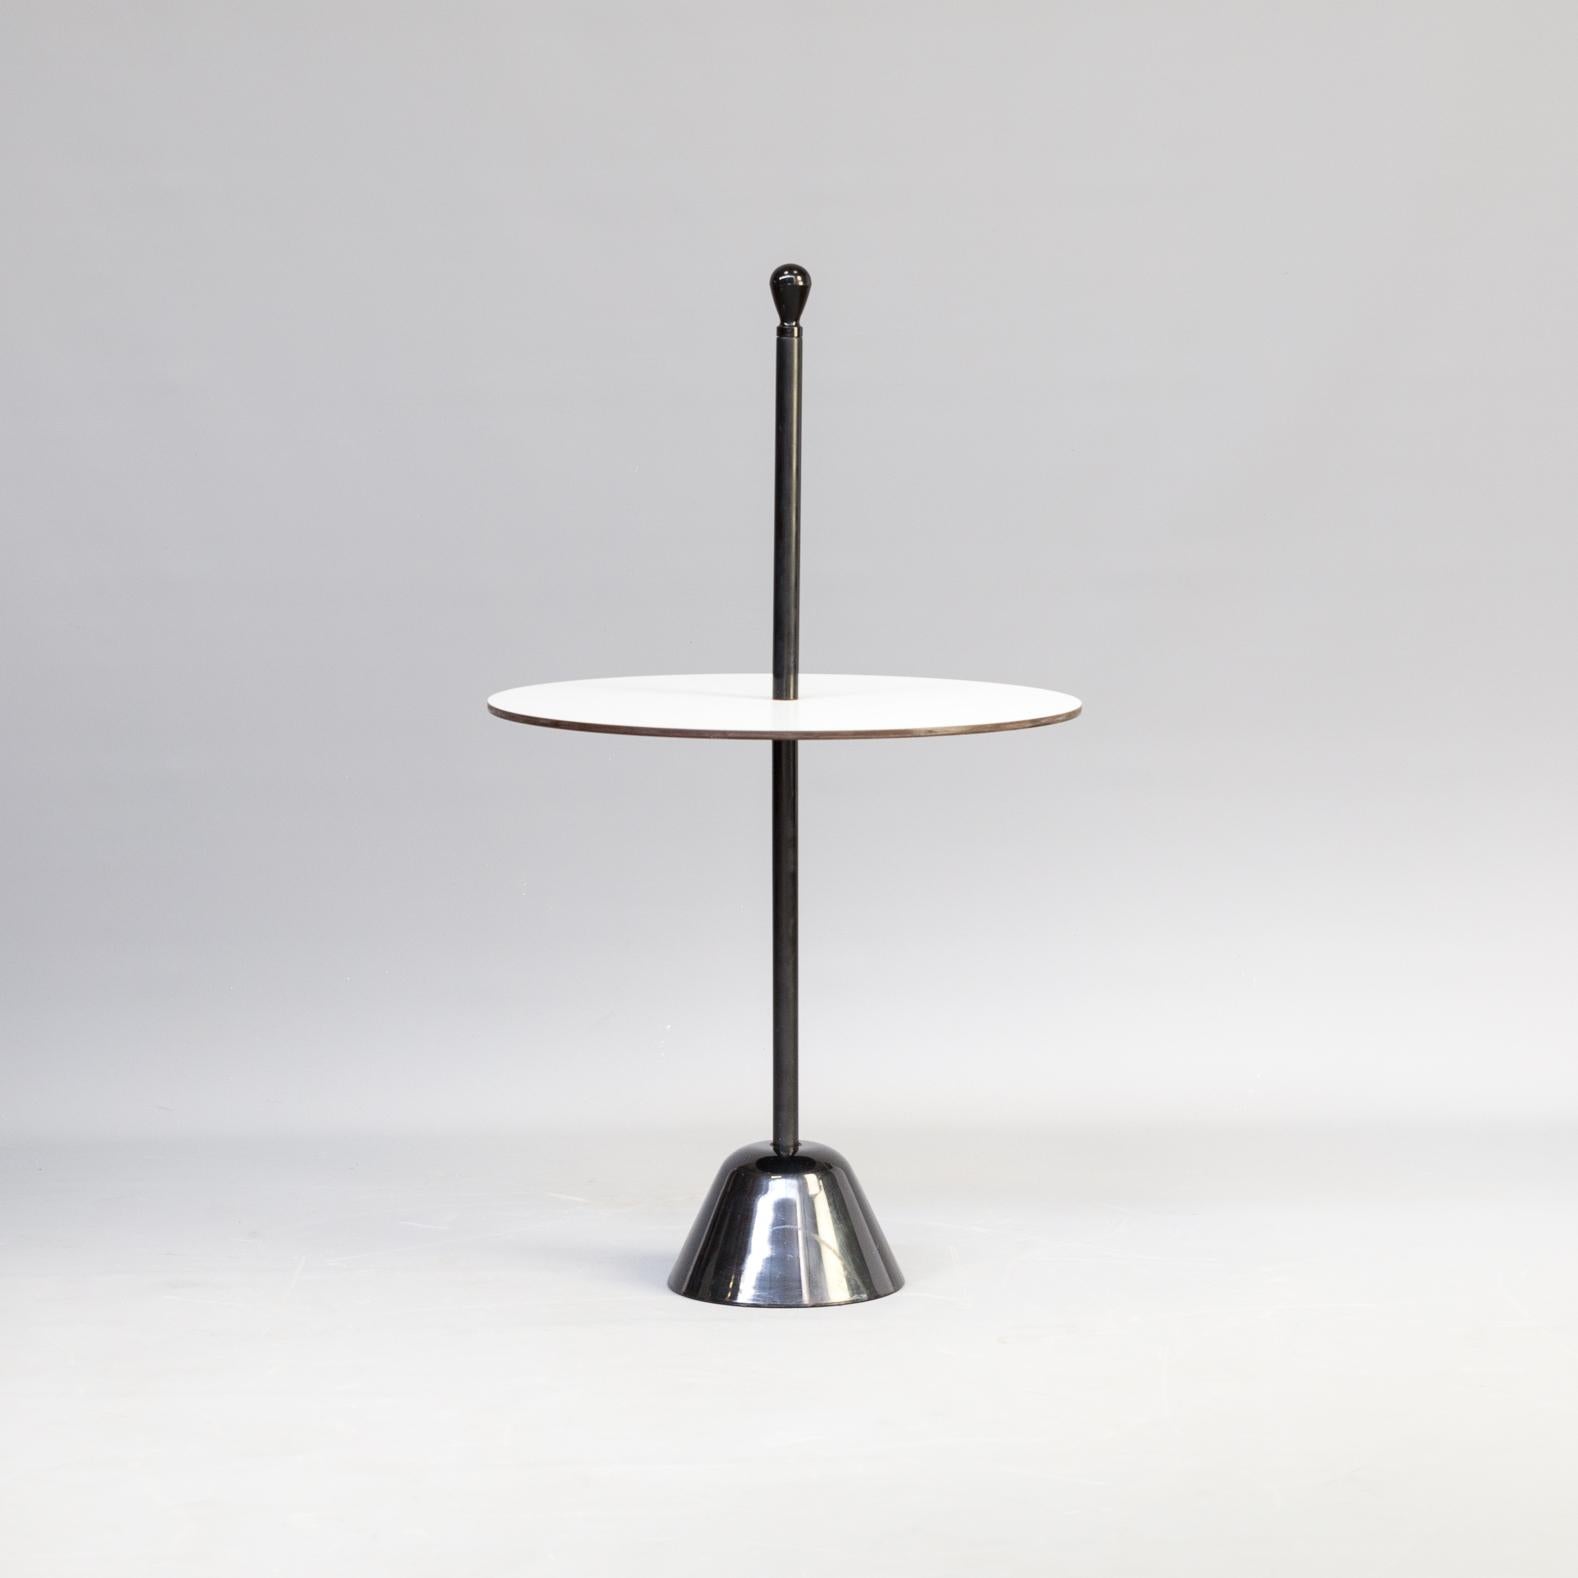 1970s Achille Castiglioni ‘Servomuto’ side table for Zanotta. An everlasting object whose shape perfectly matches its function. It has a stabile base with a very limited hindrance; a thin vertical pole with a knob at the top to hold it and a round